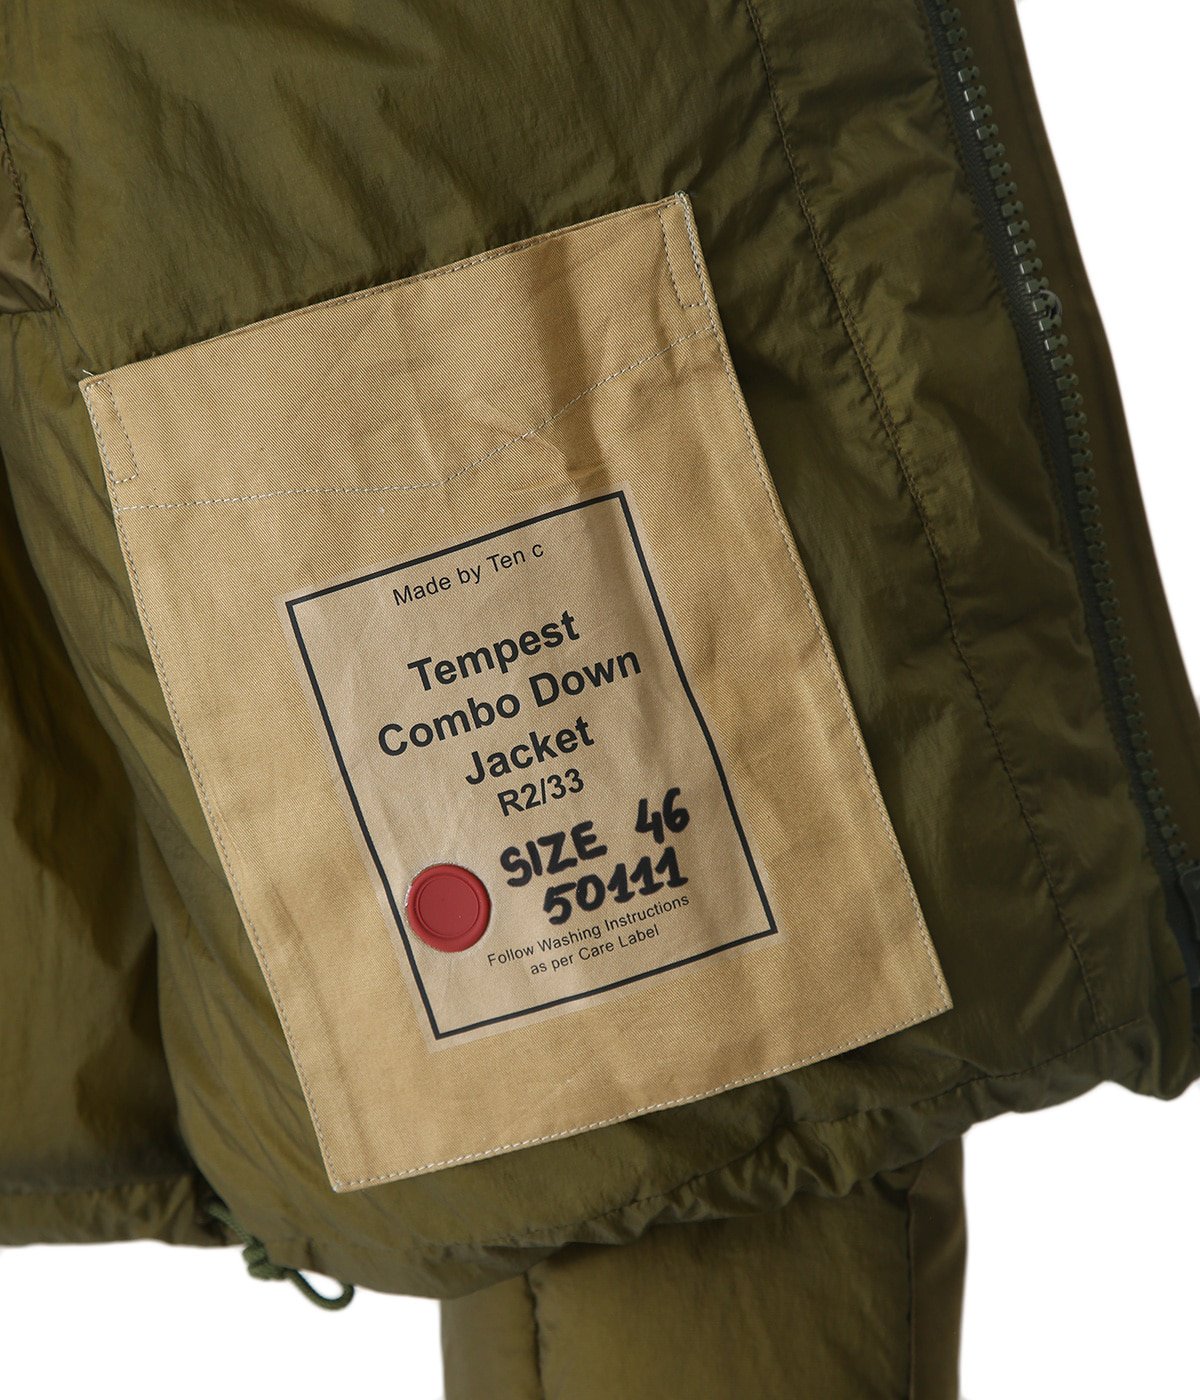 TEMPEST COMBO DOWN JACKET PIECE DYED NYLON CRINKLE RIP STOP DOWN